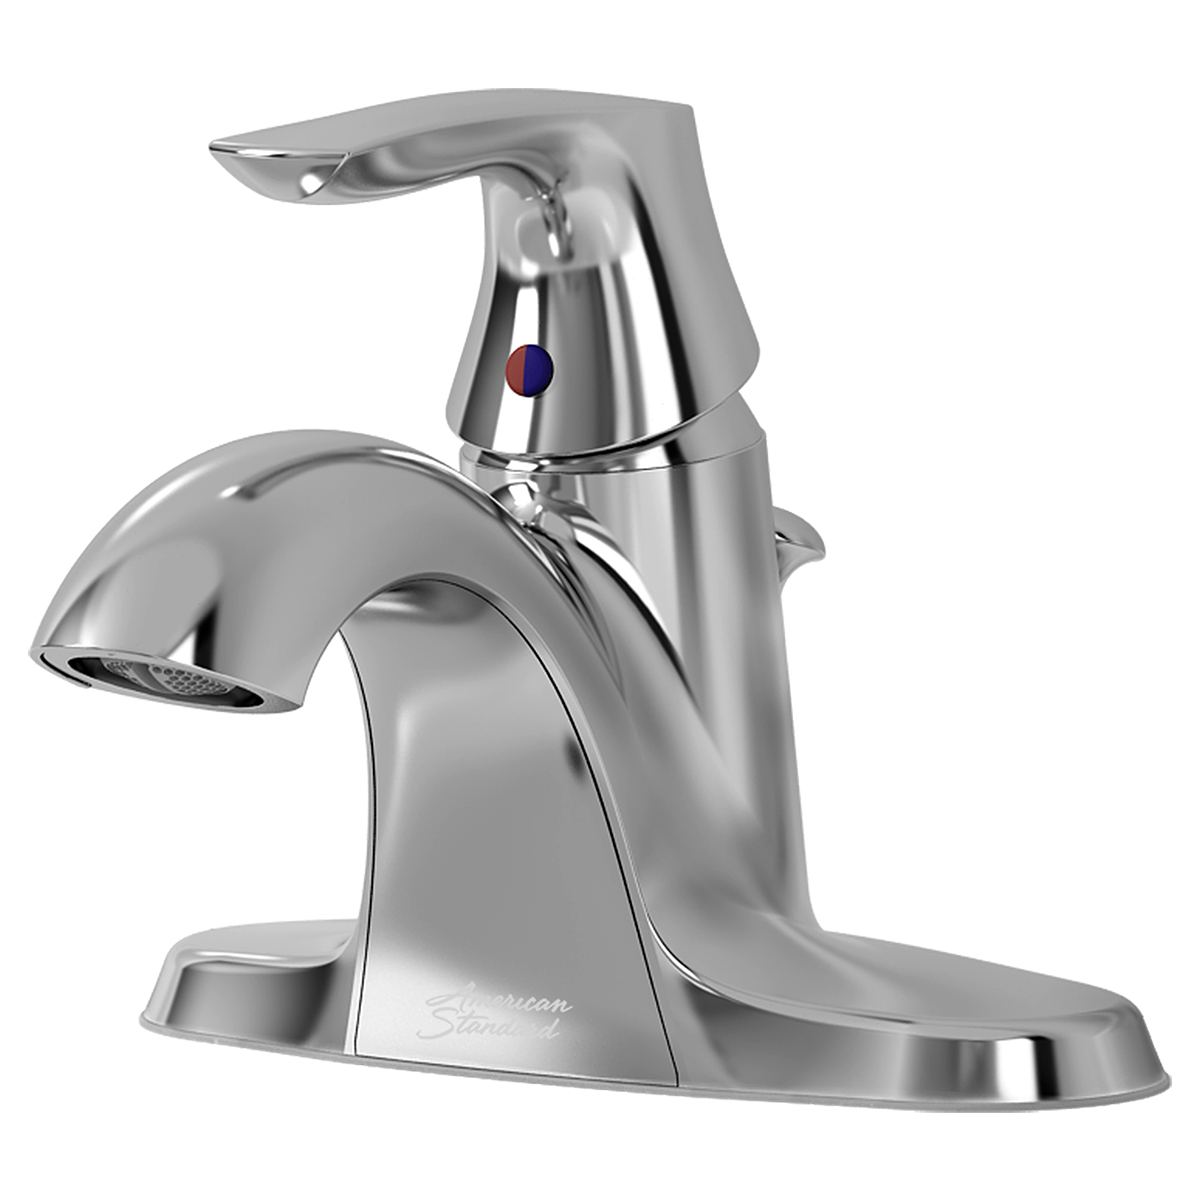 Bedminister® 4-Inch Centerset Single-Handle Bathroom Faucet 1.2 gpm/4.5 L/min With Lever Handle